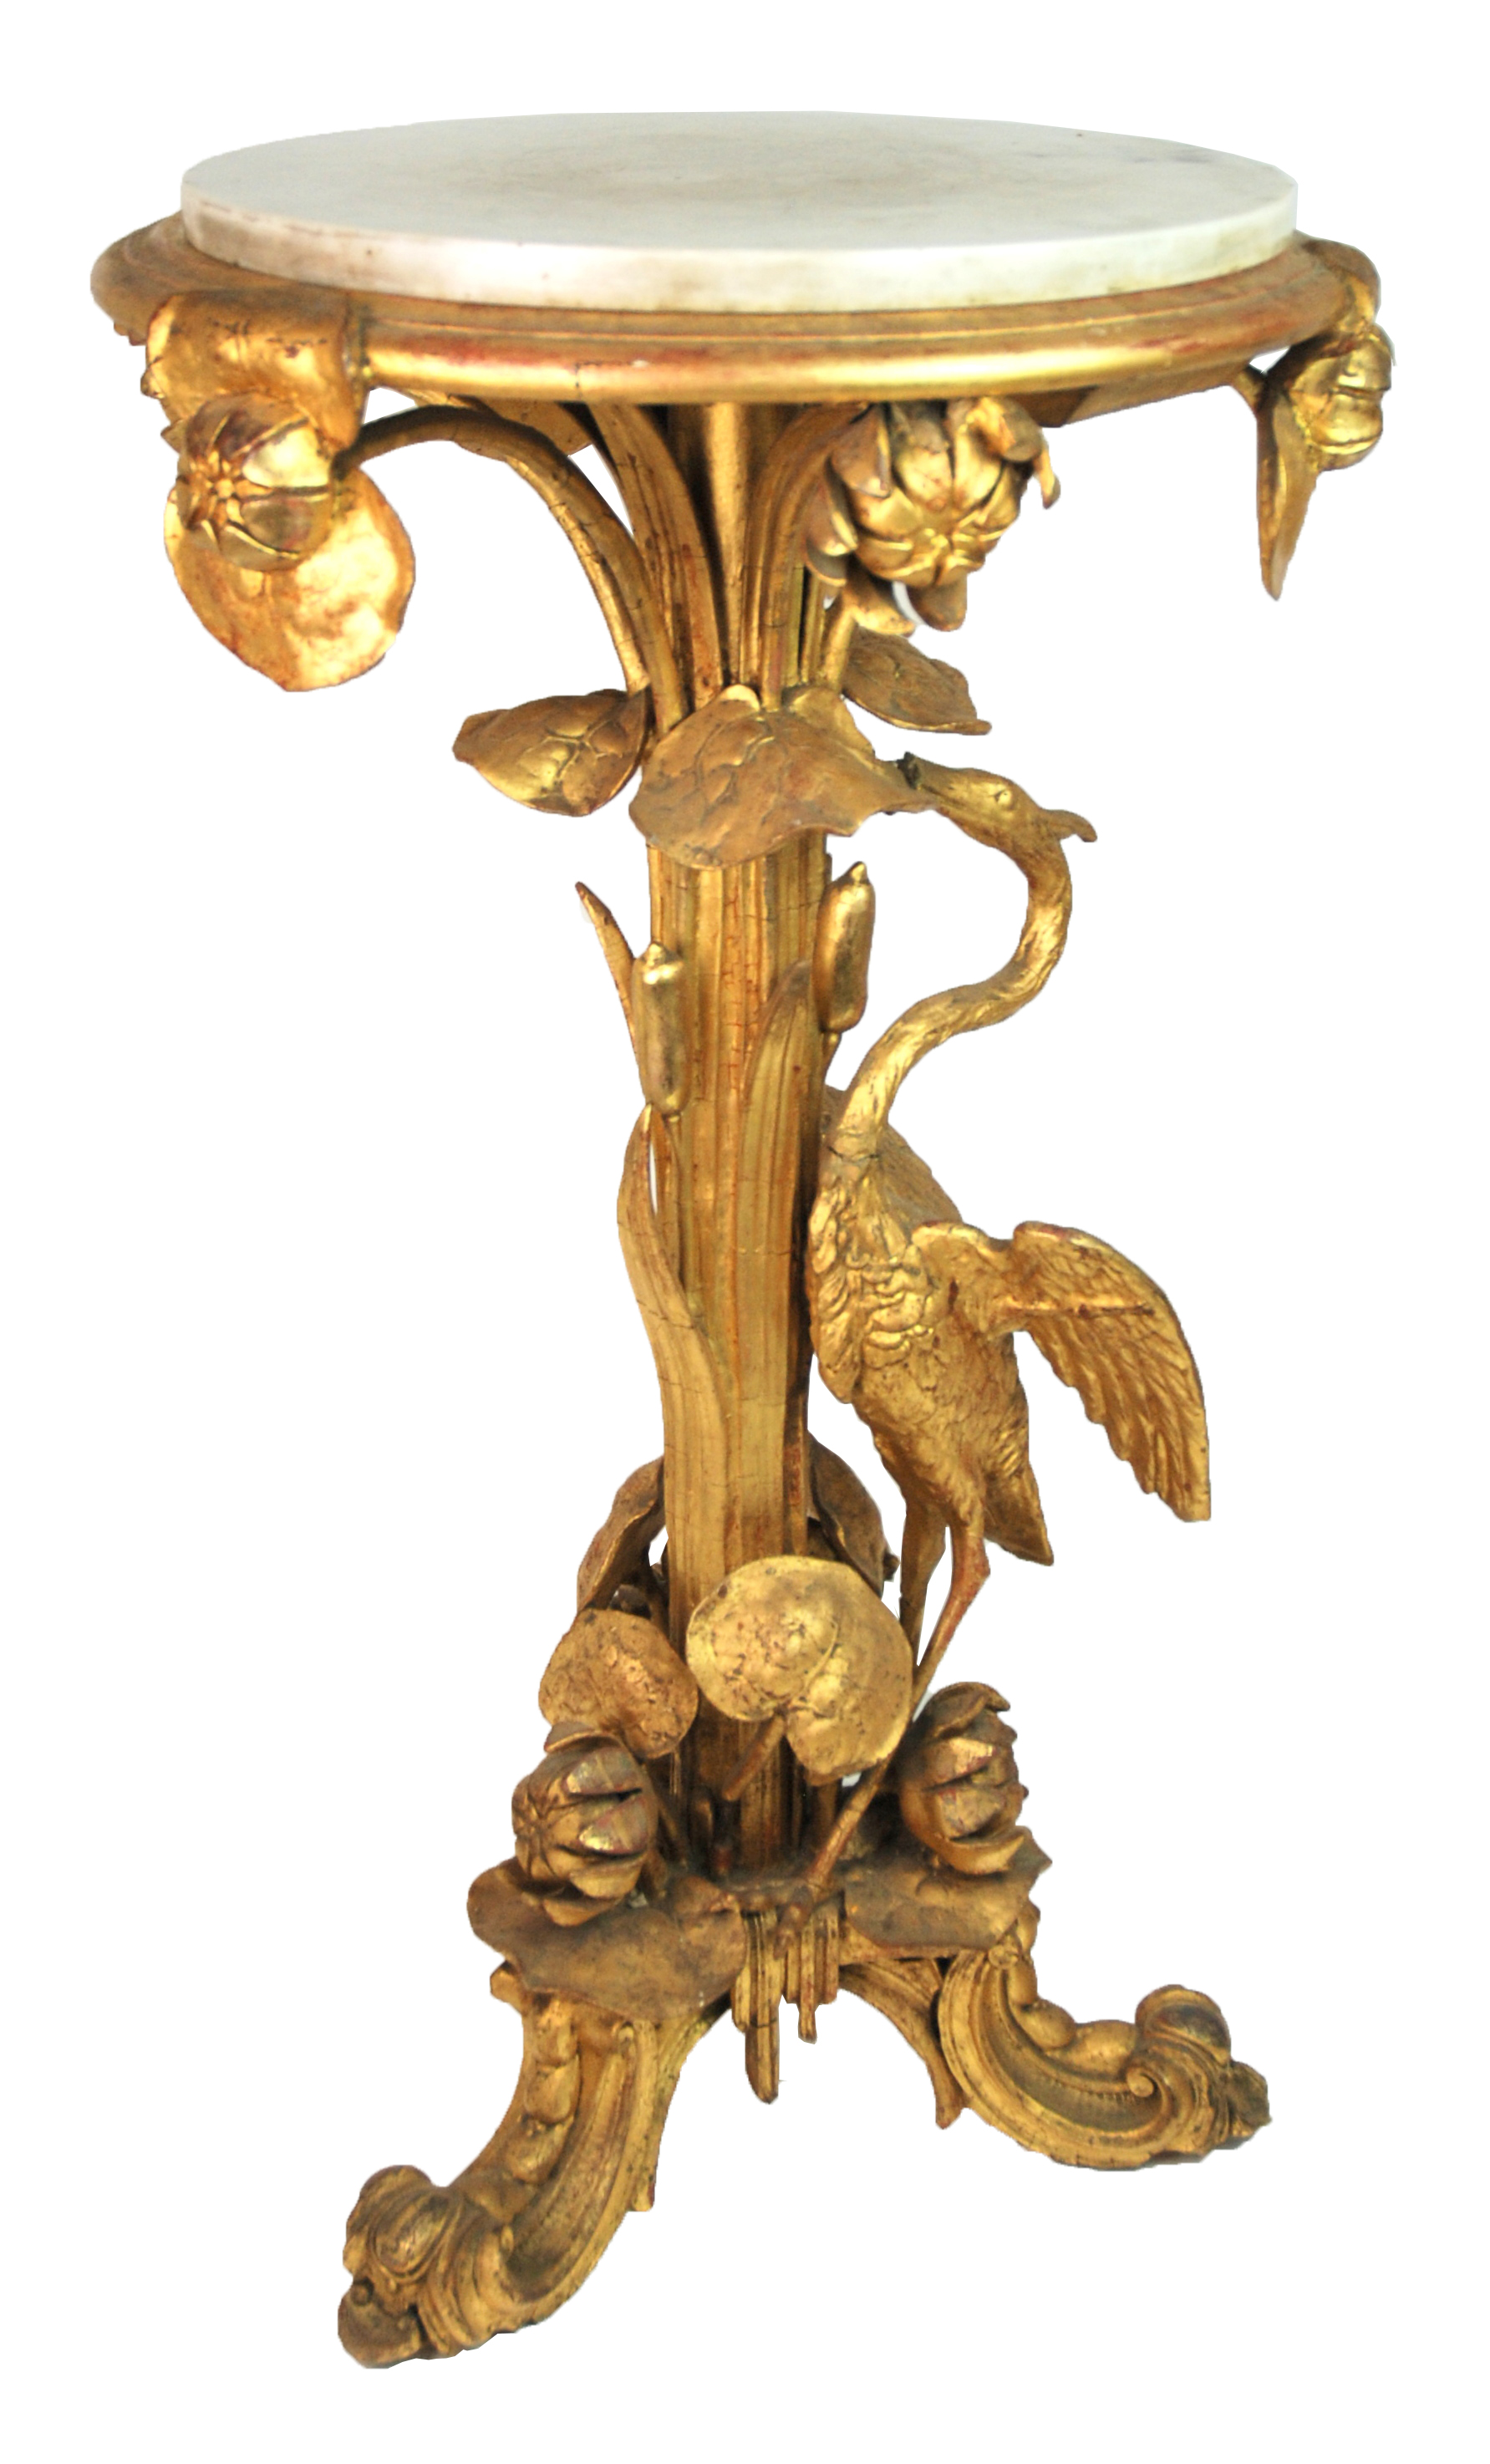 A Victorian gilt wood and gesso plant stand carved with a heron amongst bullrushes and lily pads, on